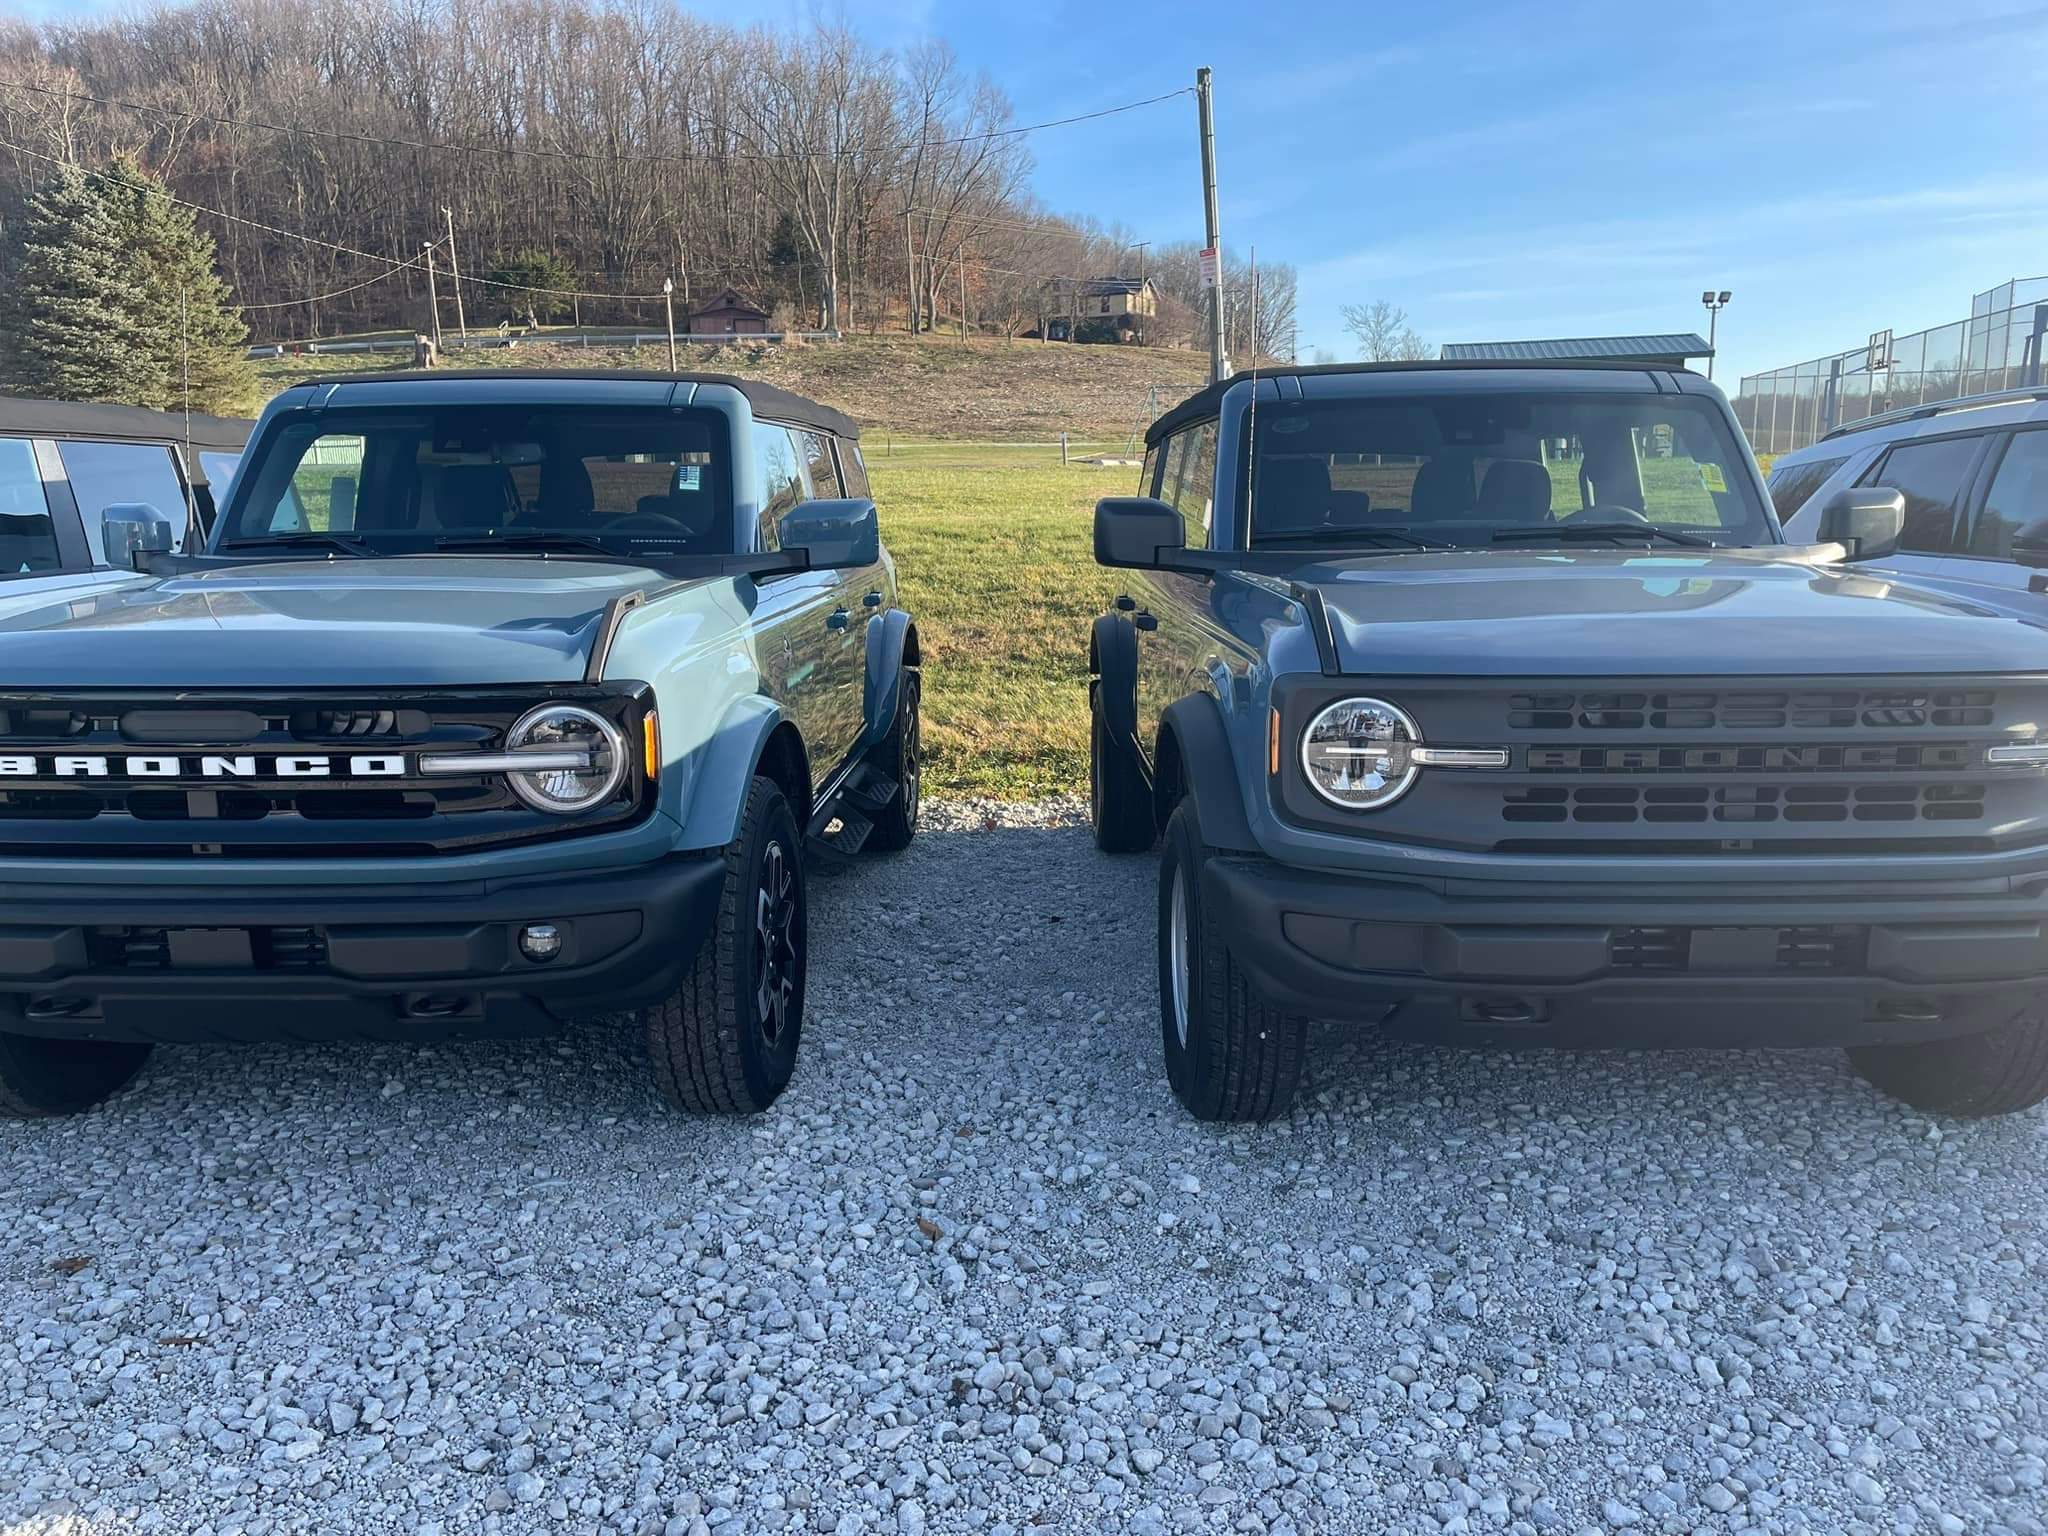 Ford Bronco Azure Gray vs Area 51 colors side-by-side comparison pics + AGM in the sun 1000003781